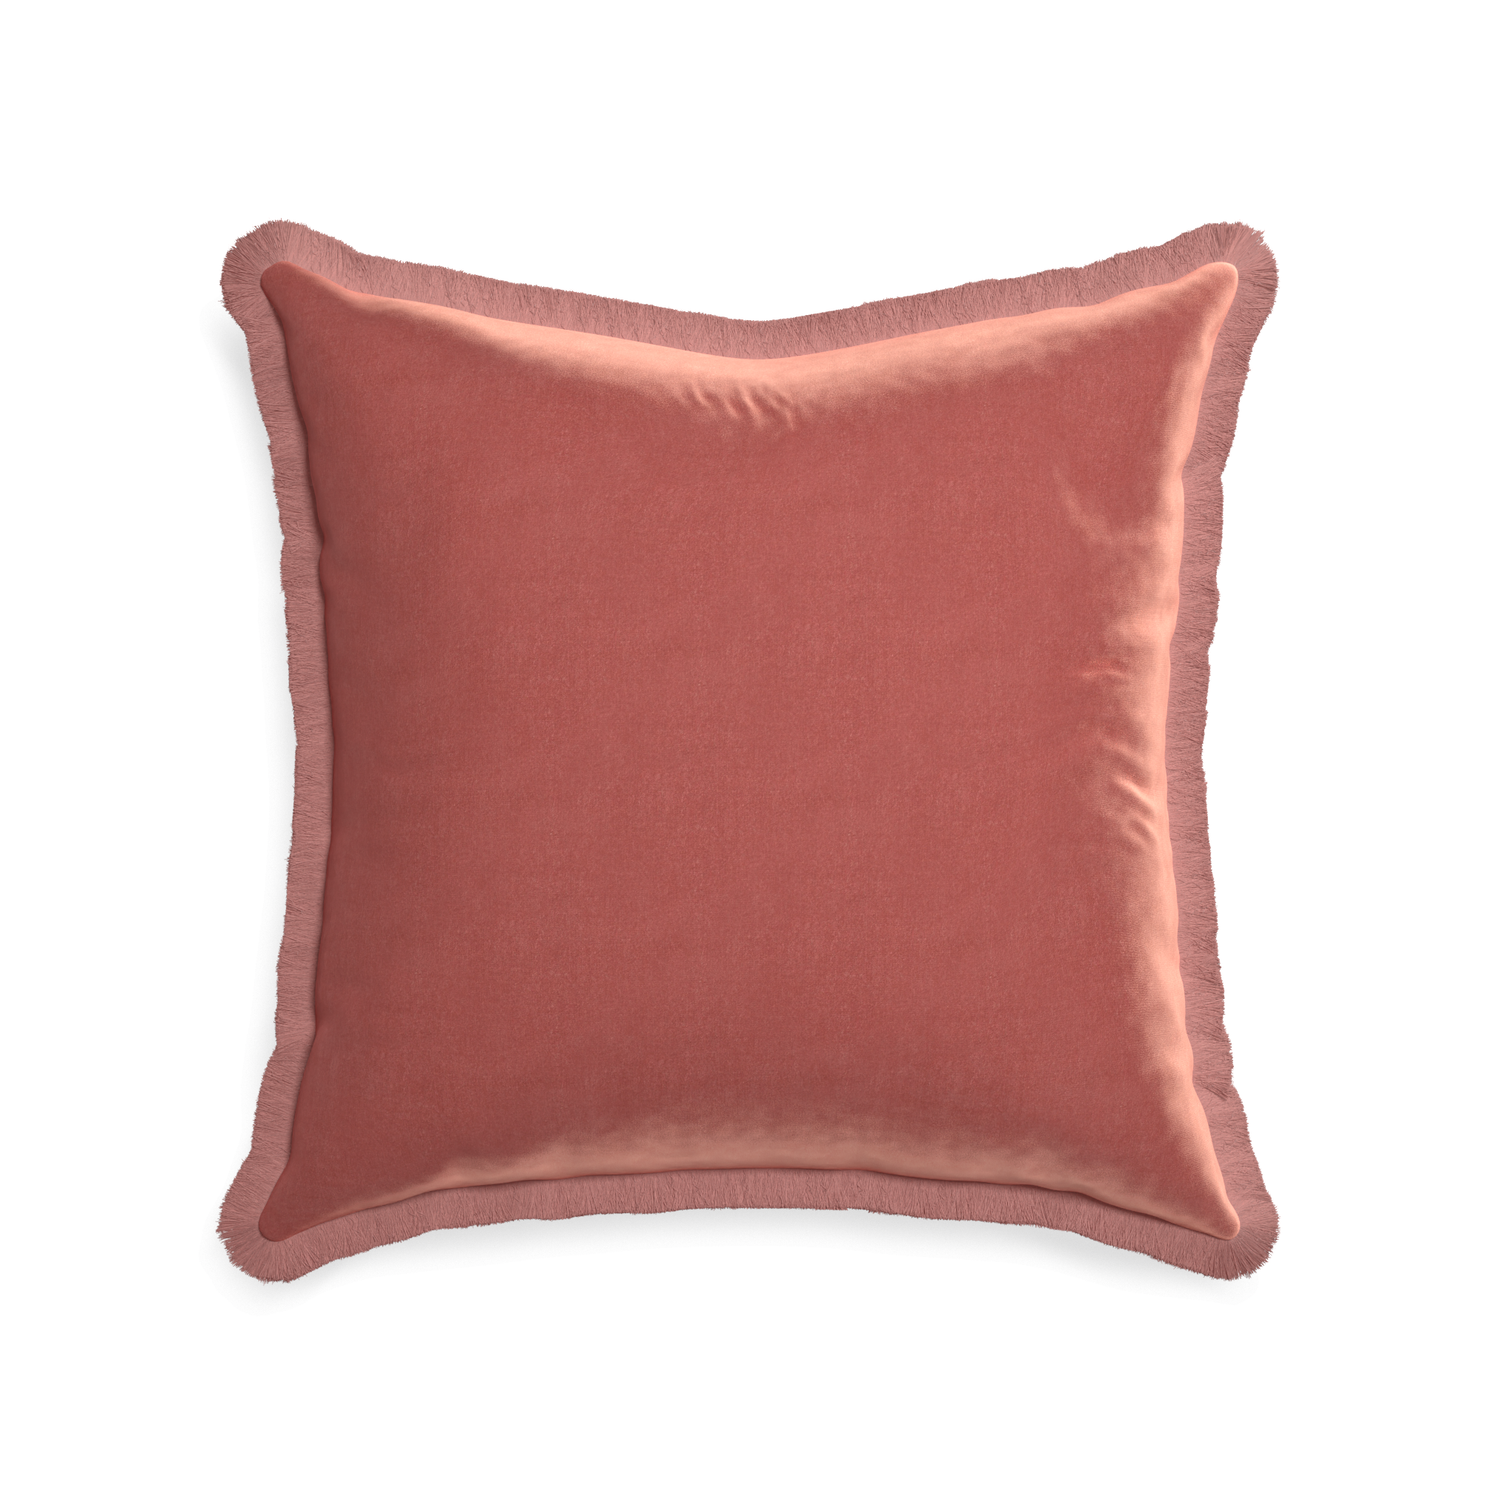 square coral velvet pillow with dusty rose fringe 